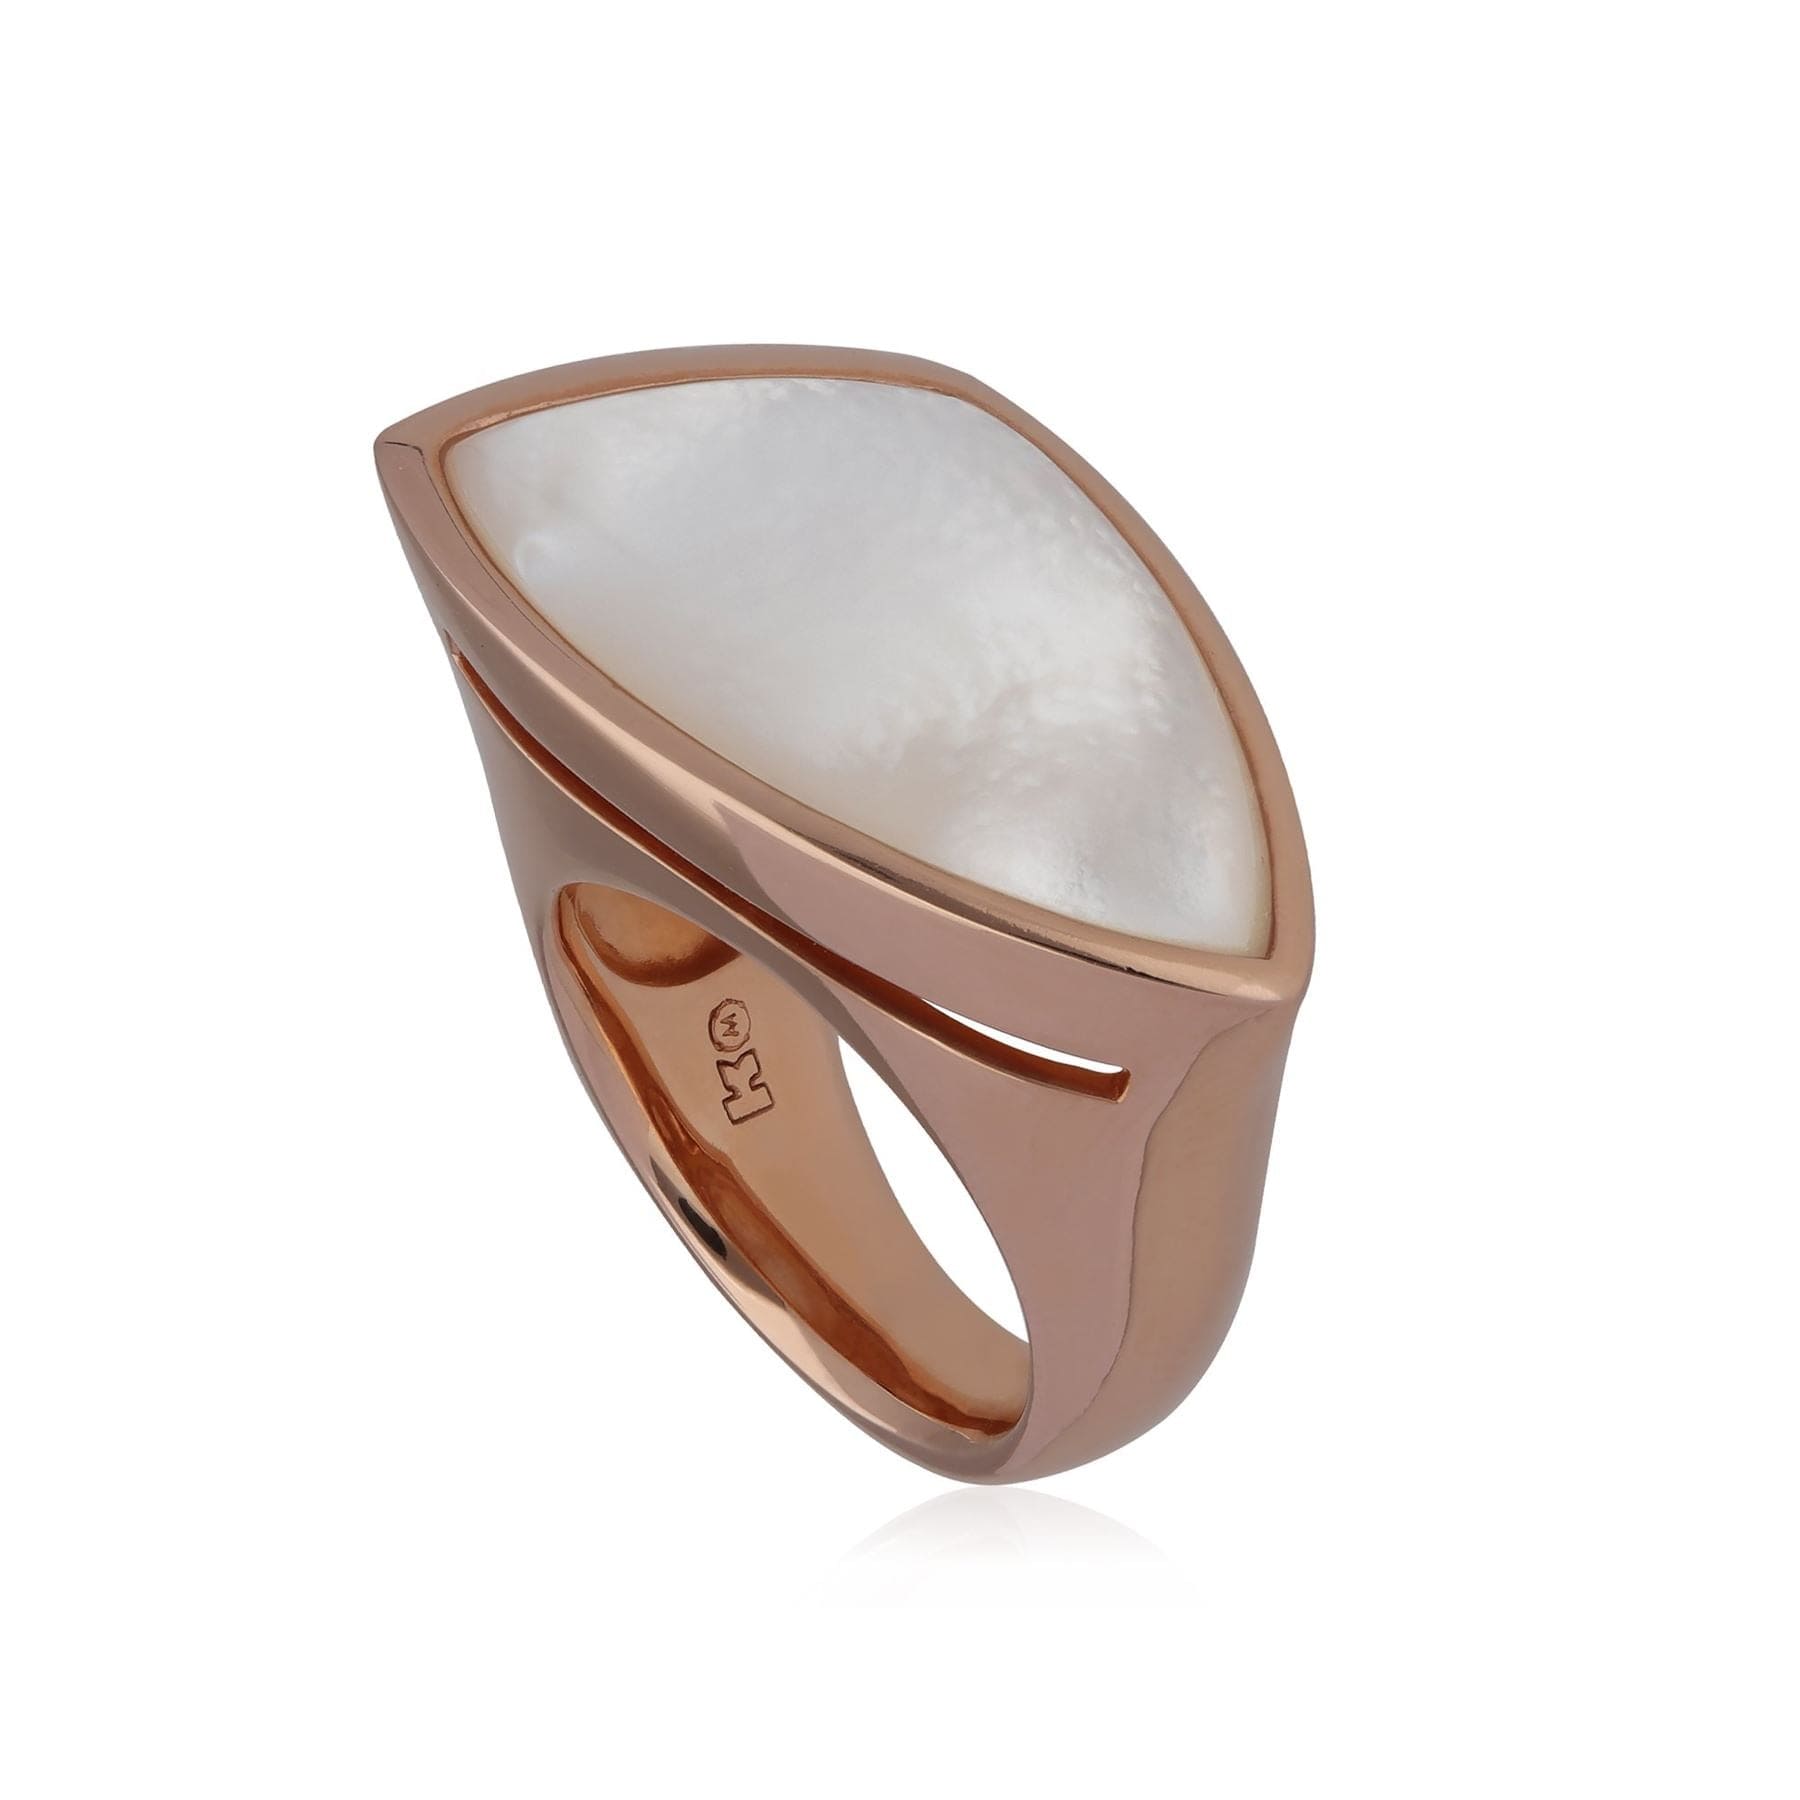 Kosmos Angular Mother of Pearl Cocktail Ring in Rose Gold Plated Sterling Silver - Gemondo